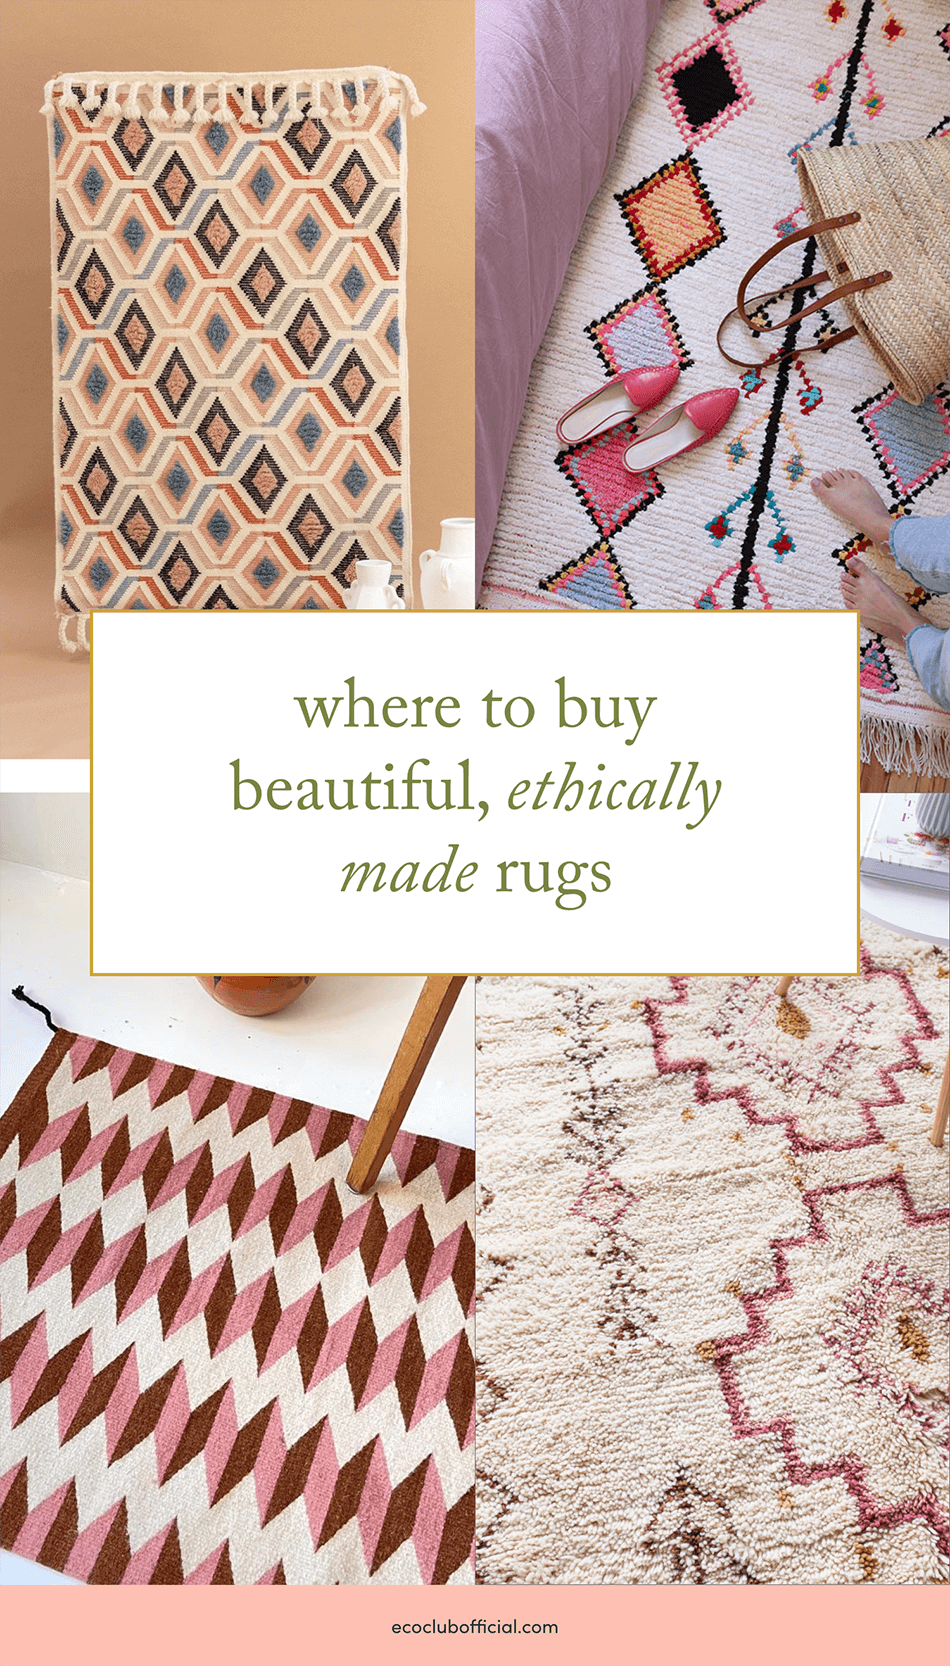 where to buy ethical rugs - eco club